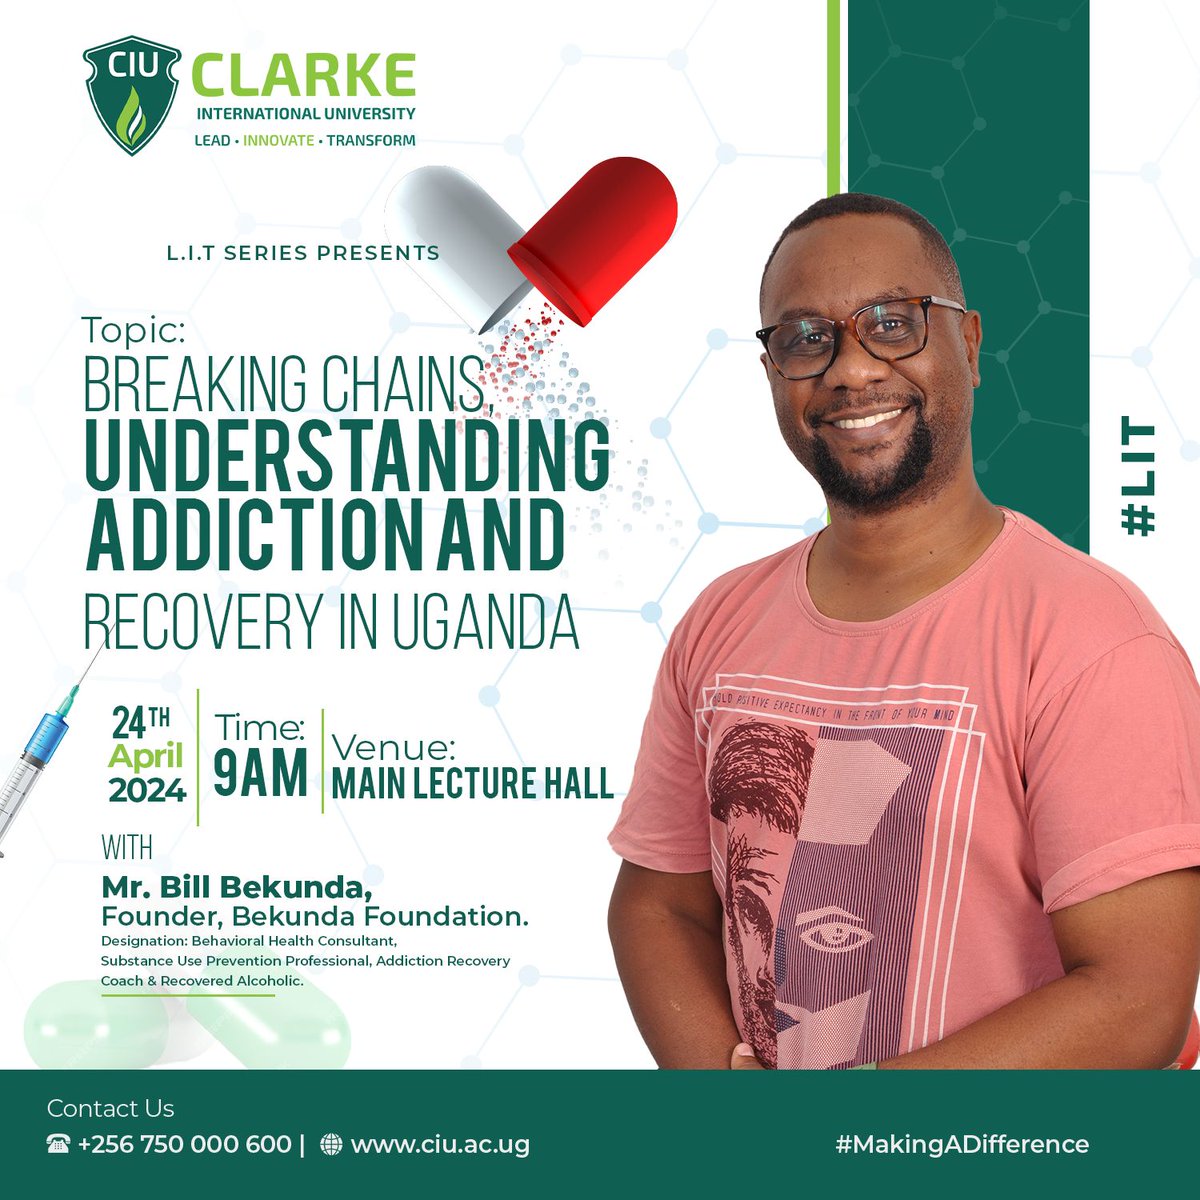 Struggling with addiction? Seeking answers? Join the LIT Series on April 24th as we discuss Breaking Chains: Understanding Addiction & Recovery in Uganda. #LITSeries #AddictionRecovery #Uganda #QuteKaye #CIU #Lead #Innovate #Transform